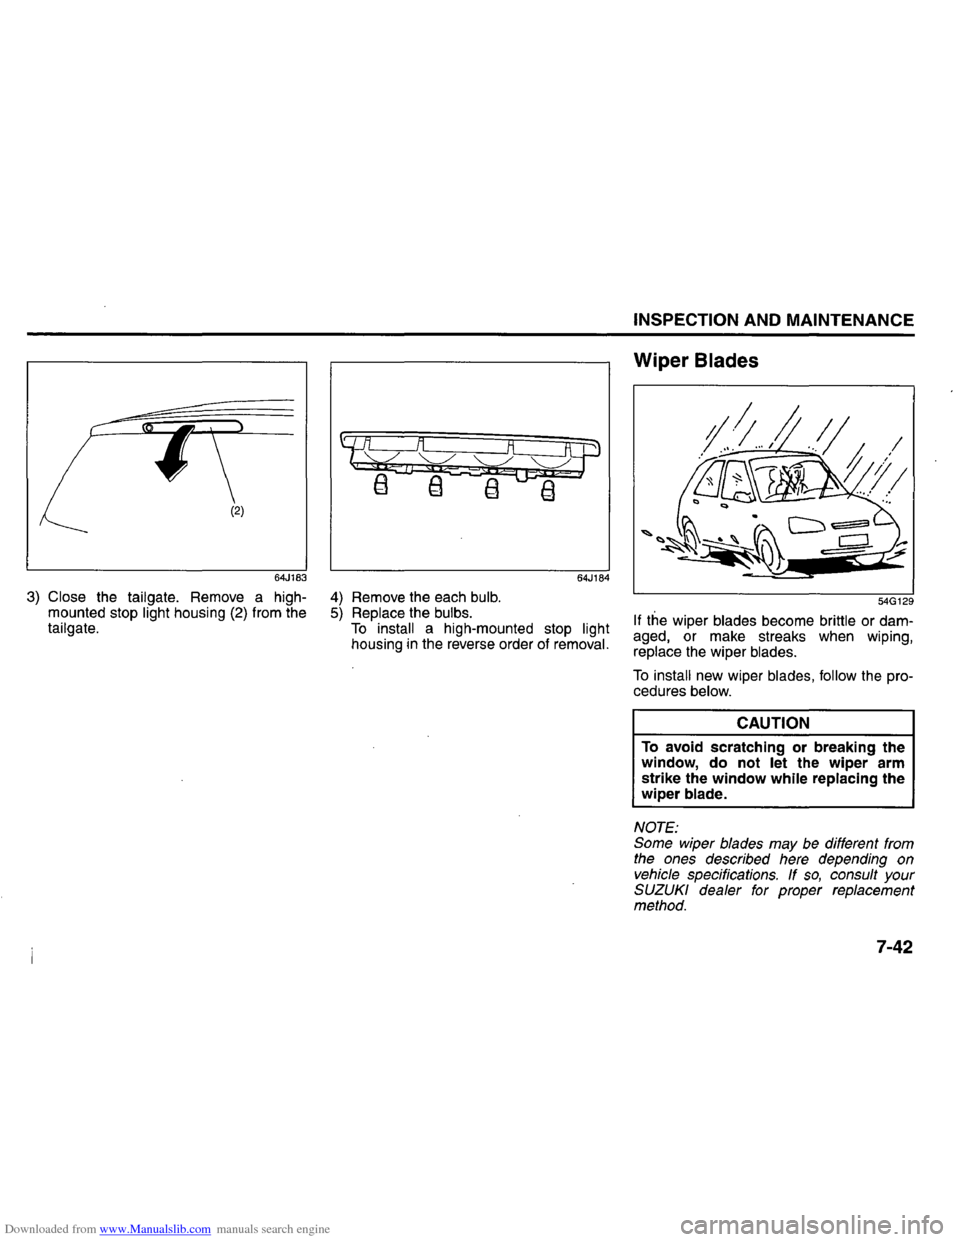 SUZUKI GRAND VITARA 2008 3.G Inspection And Maintenance Manual Downloaded from www.Manualslib.com manuals search engine (2) 
64J183 
3) Close the tailgate.  Remove  a high­
mounted  stop light housing (2) from the tailgate. 
64J184 
4) Remove  the each bulb. 5) 